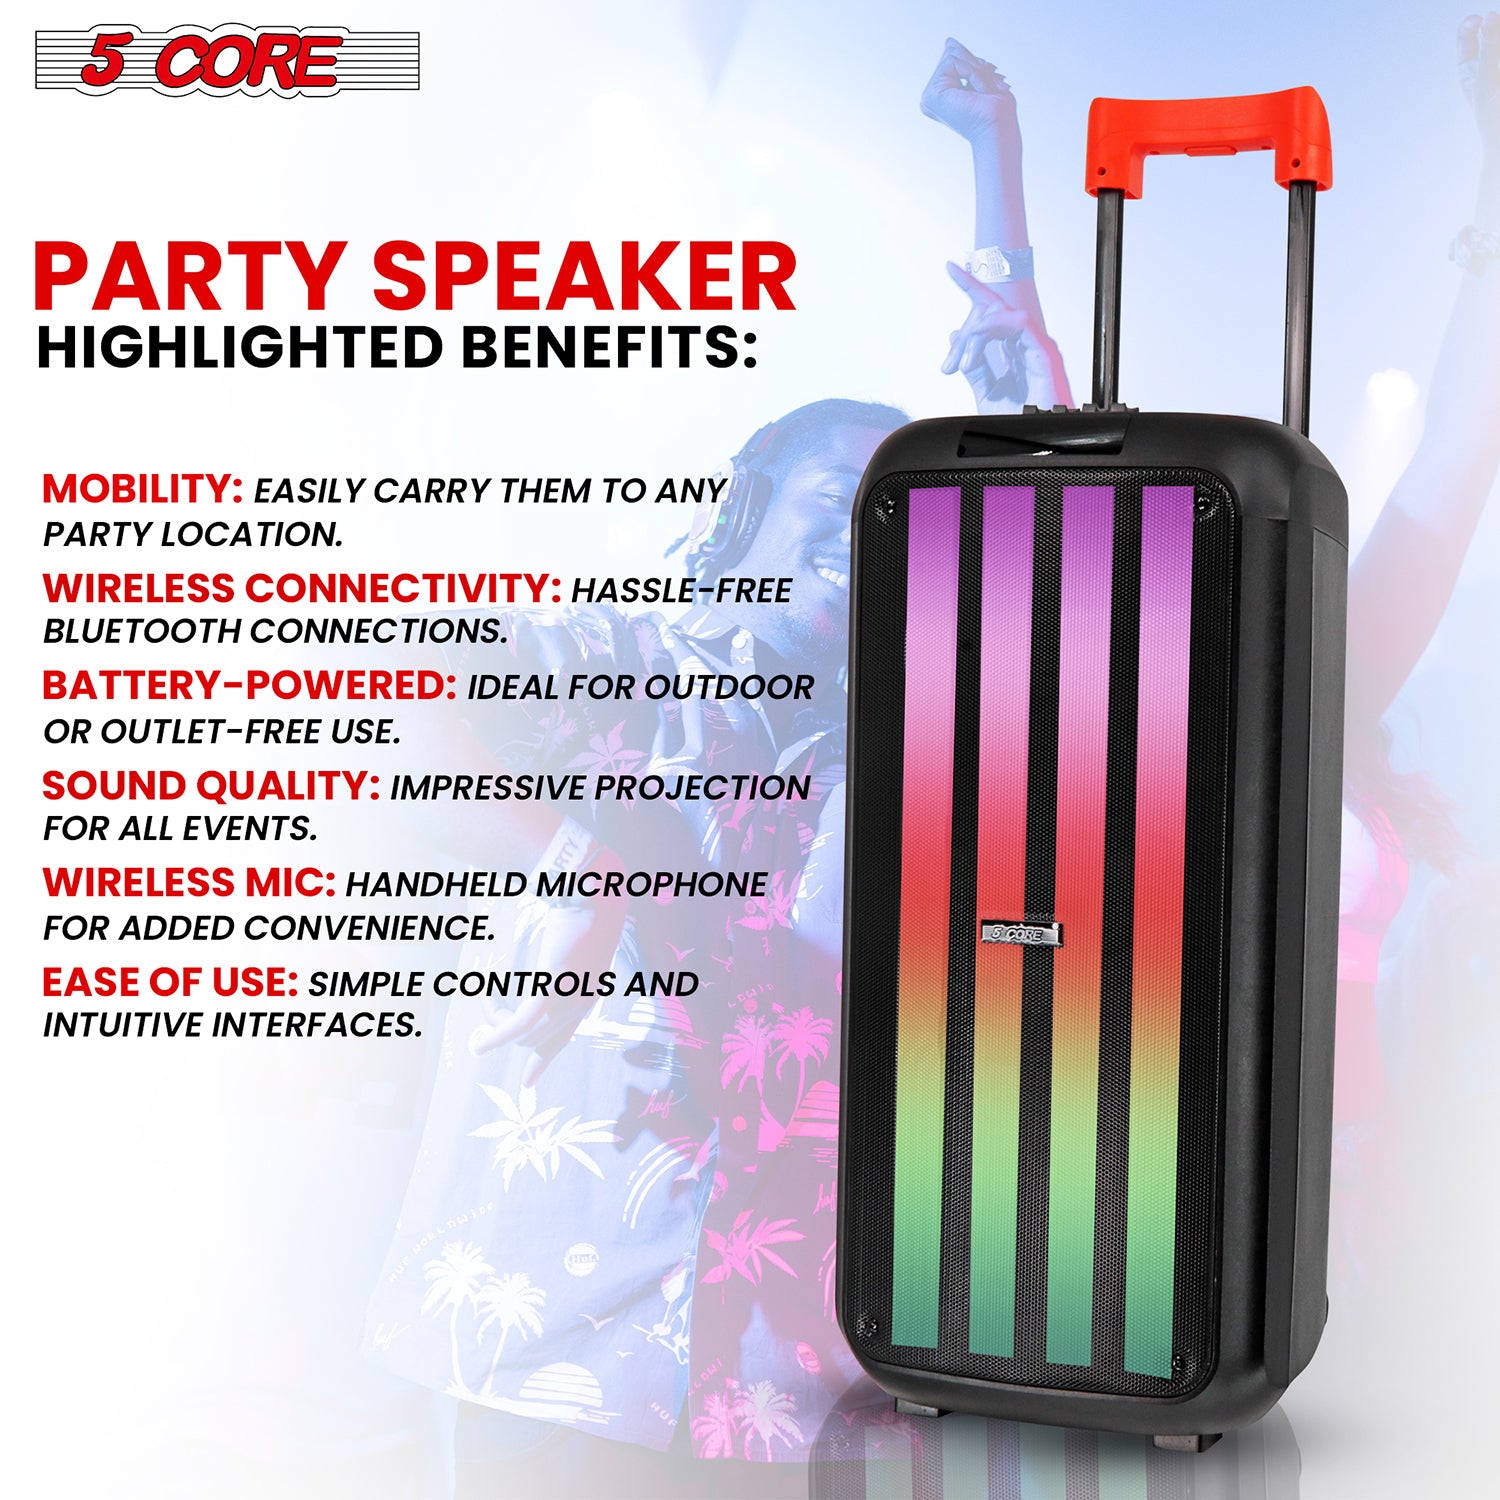 Party speaker is Rechargeable with 4-6 hours of non-stop music.